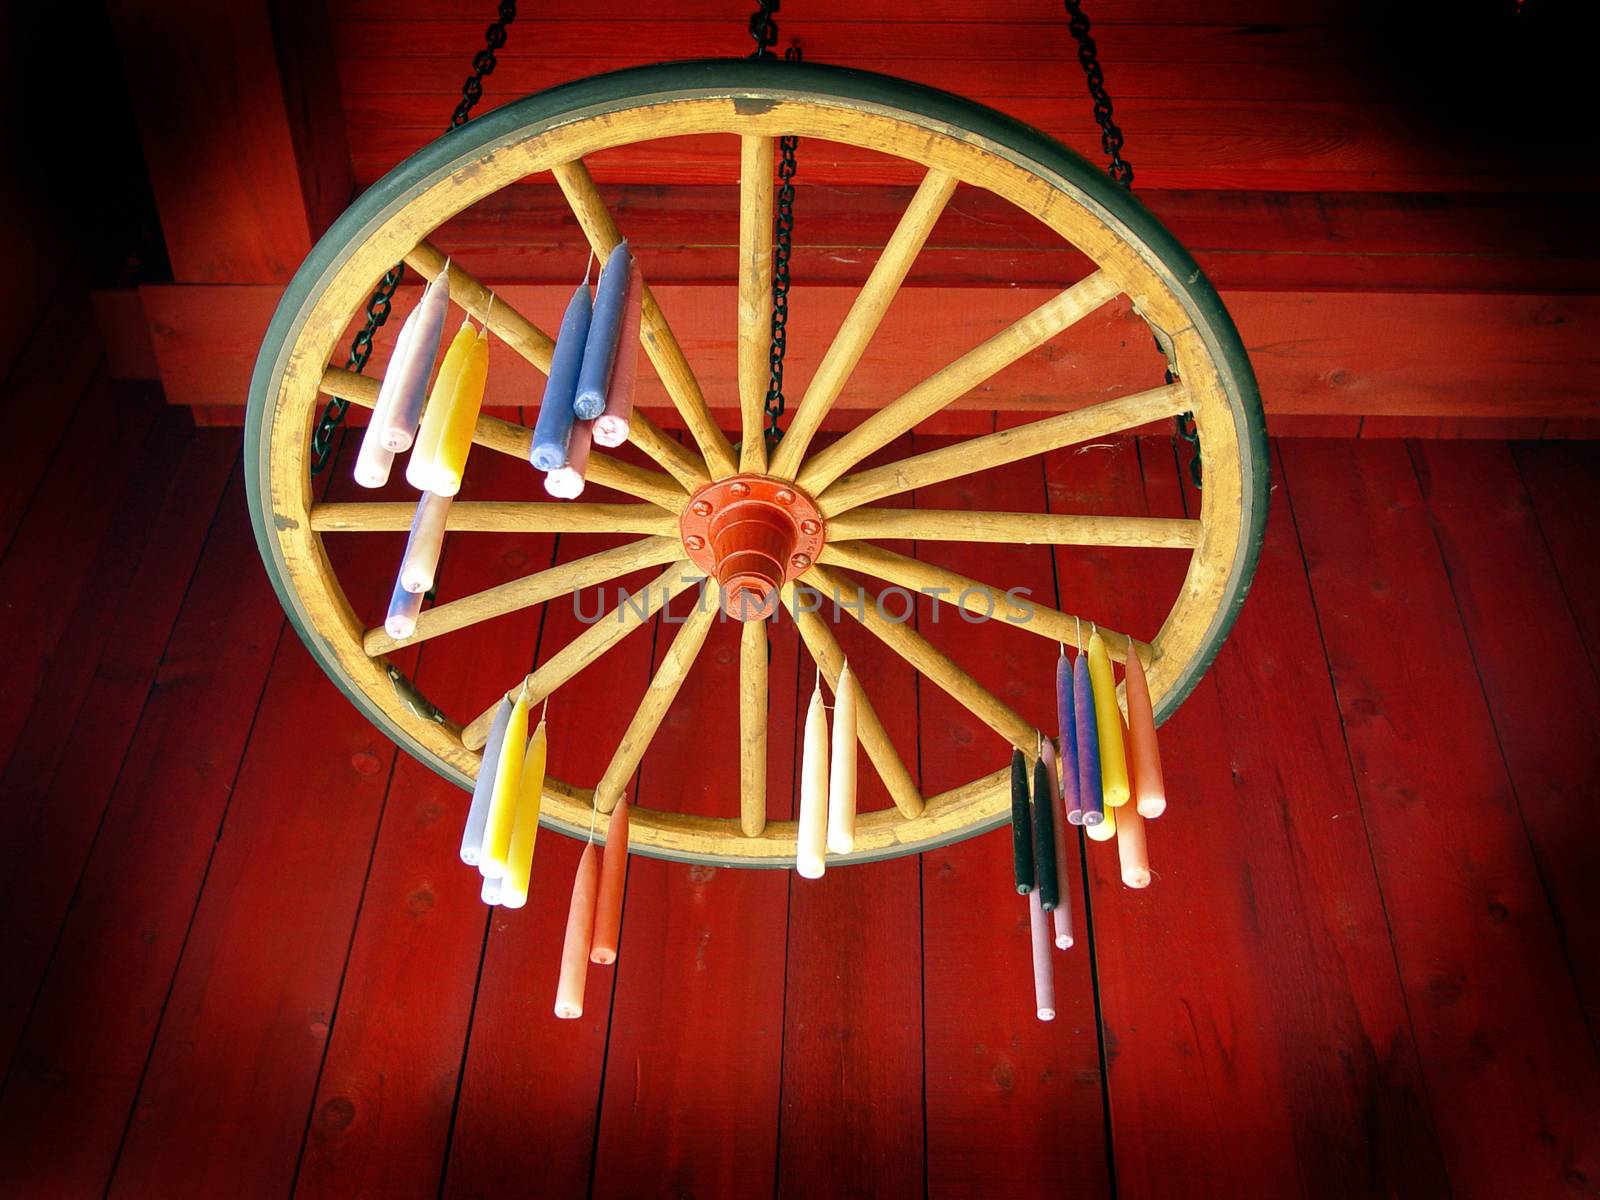 Candles hung to dry on wagon wheel